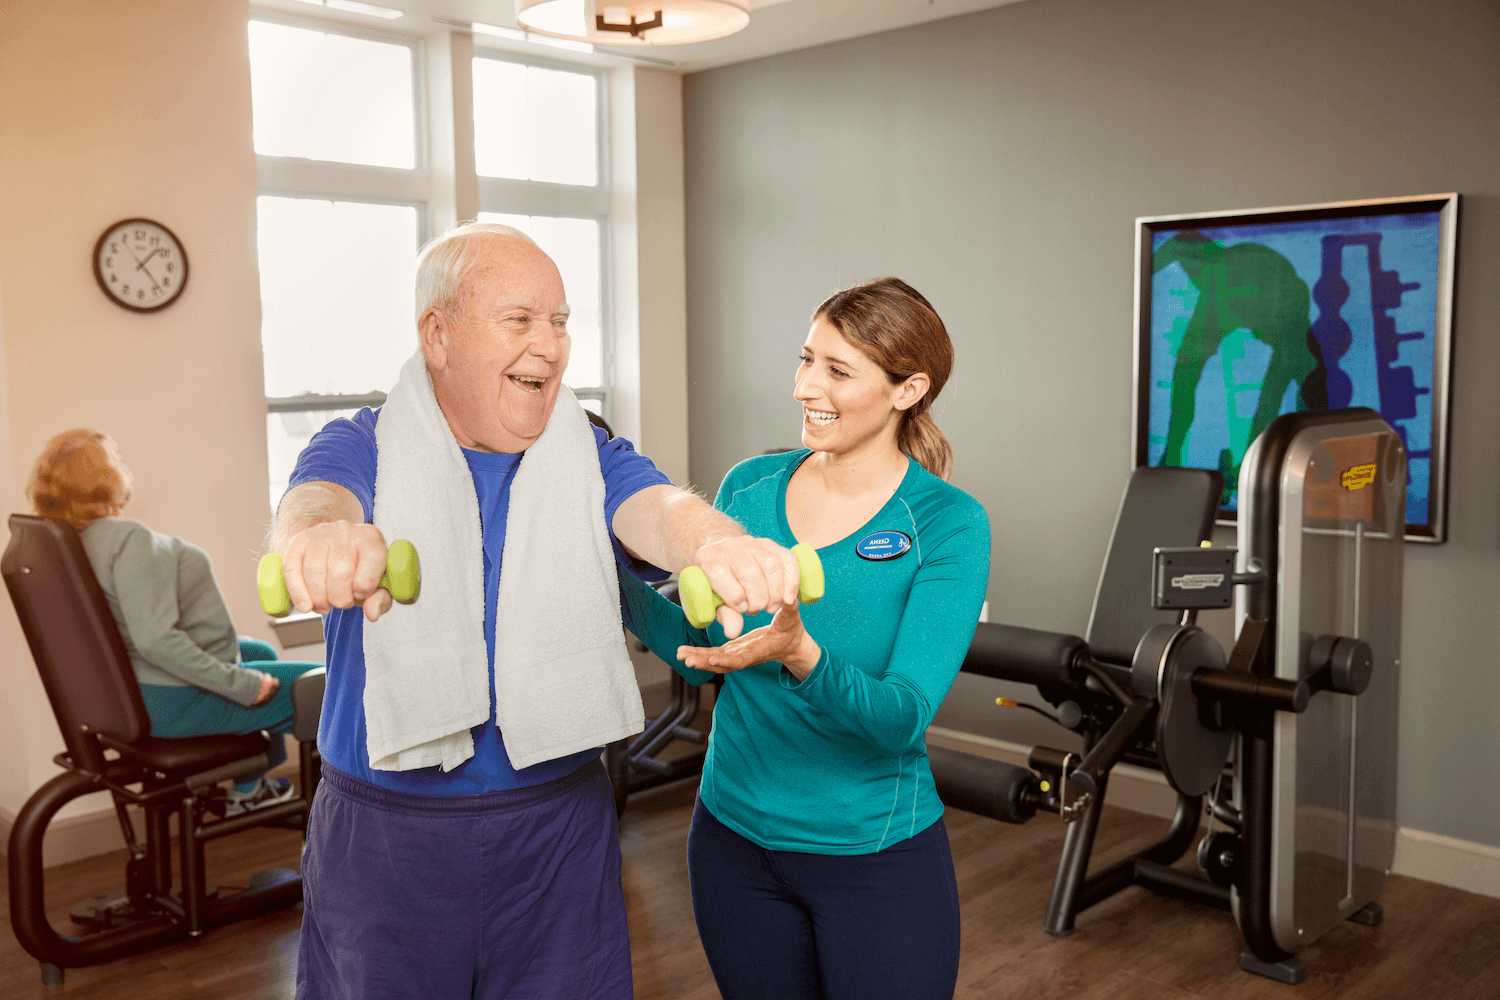 physical therapist in teal shirt helping older patient